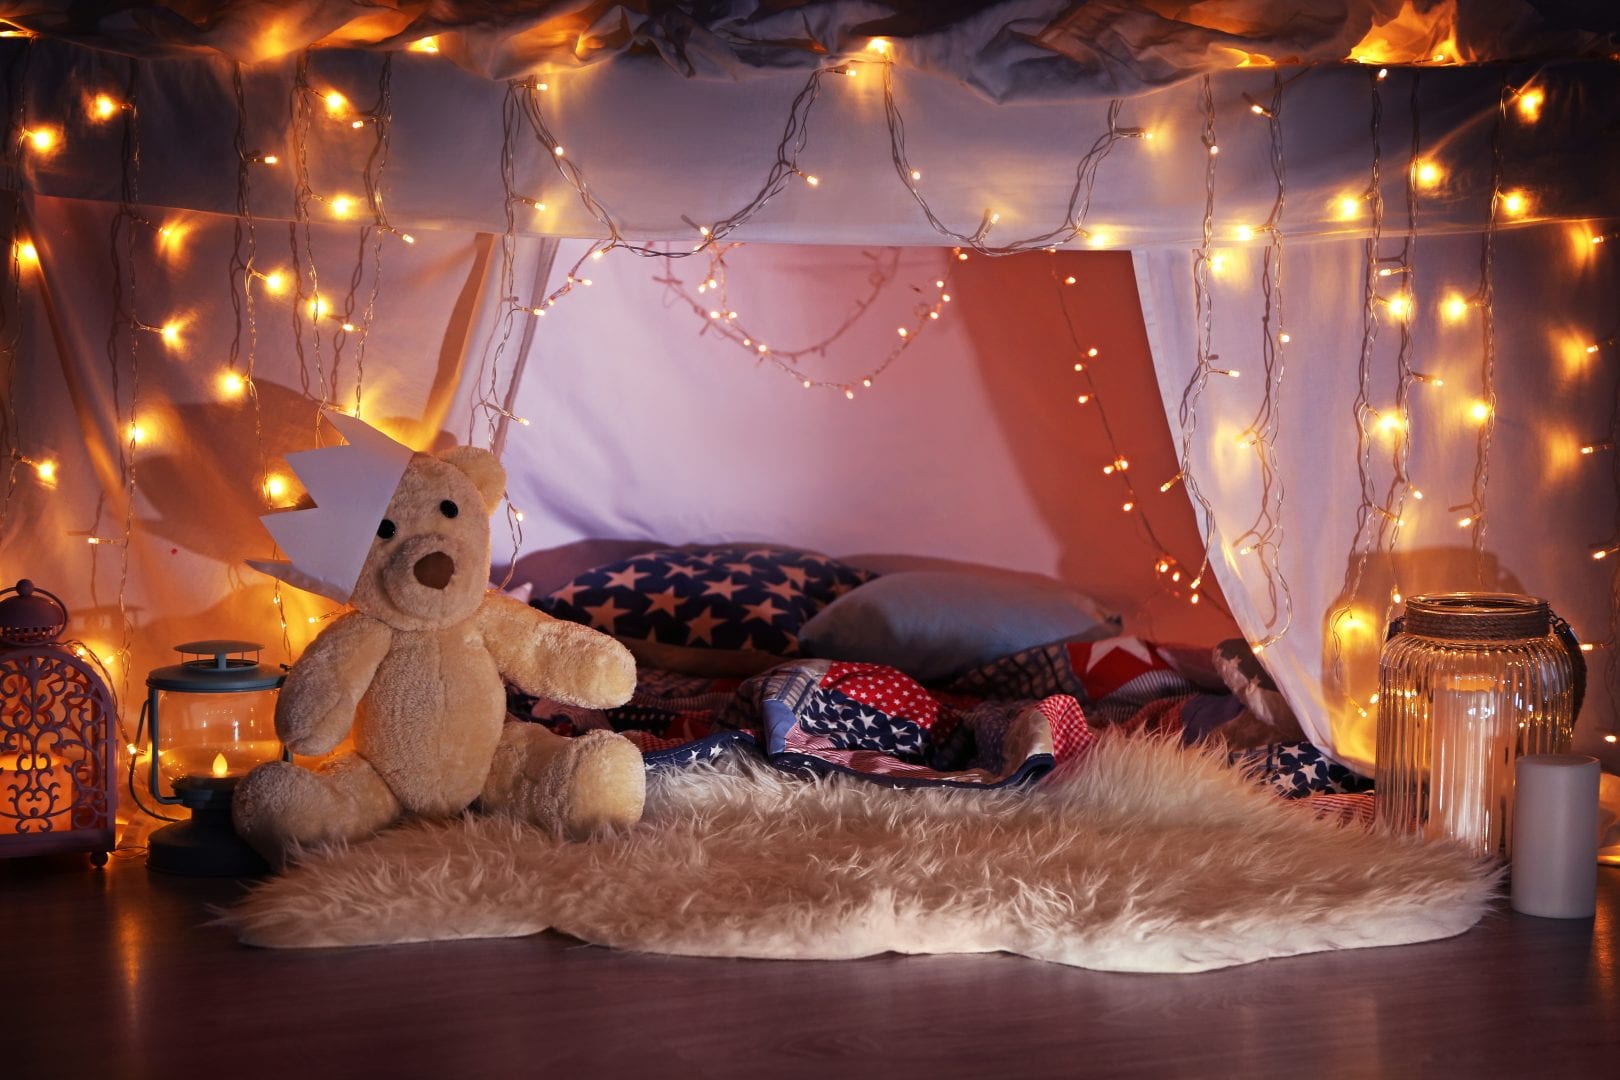 an indoor tent built out of sheets featuring, pillows, blankets, a teddy bear, and twinkle lights.